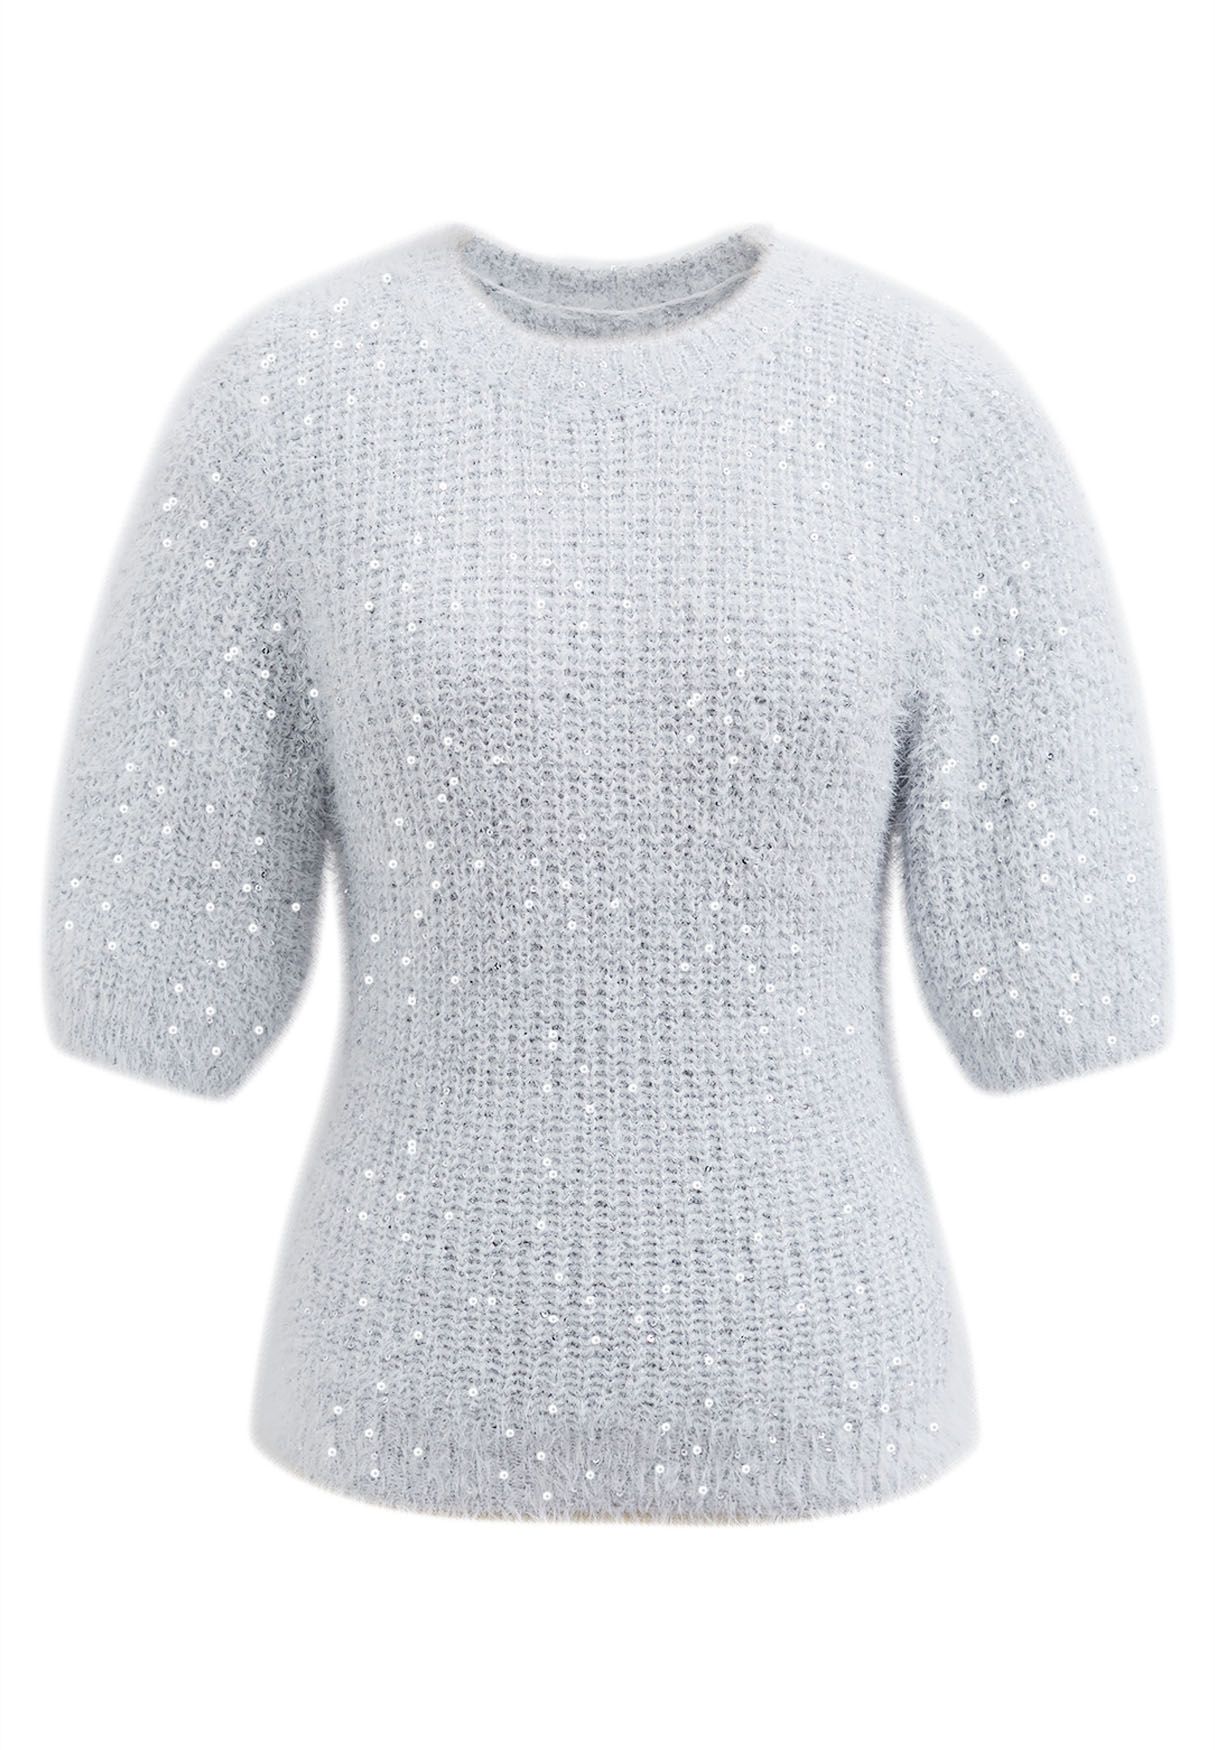 Sequin Fuzzy Short Sleeve Sweater in Silver